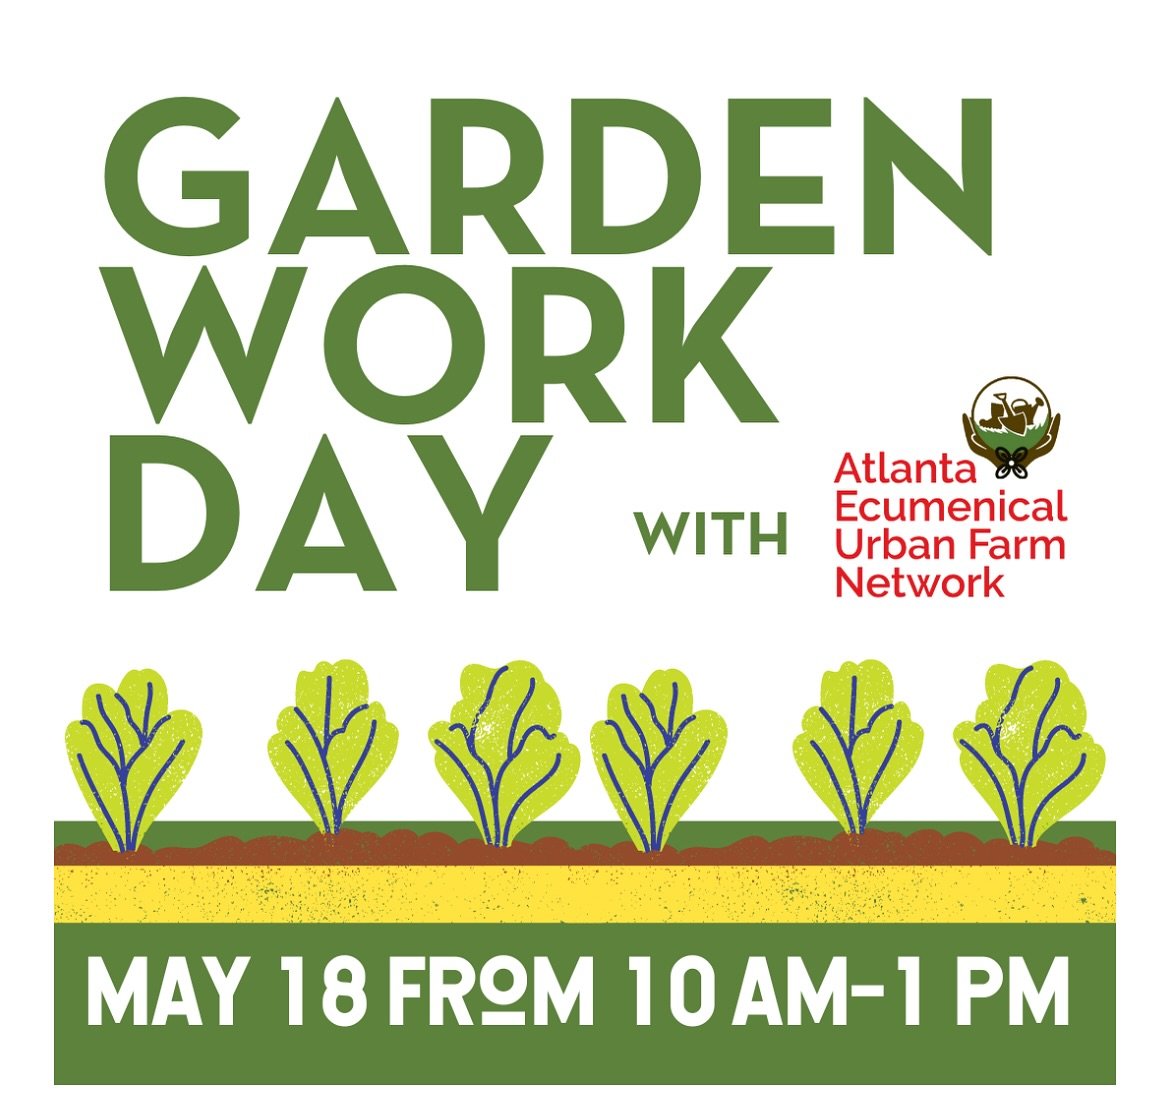 Our next garden work day is coming up in a little over a week &amp; you&rsquo;re invited! 🌱 

Join leaders of the Atlanta Ecumenical Urban Farm Network (AEUFN) on Saturday, May 18 from 10am - 1pm. All ages welcomed!

Bring a water bottle, gloves (if